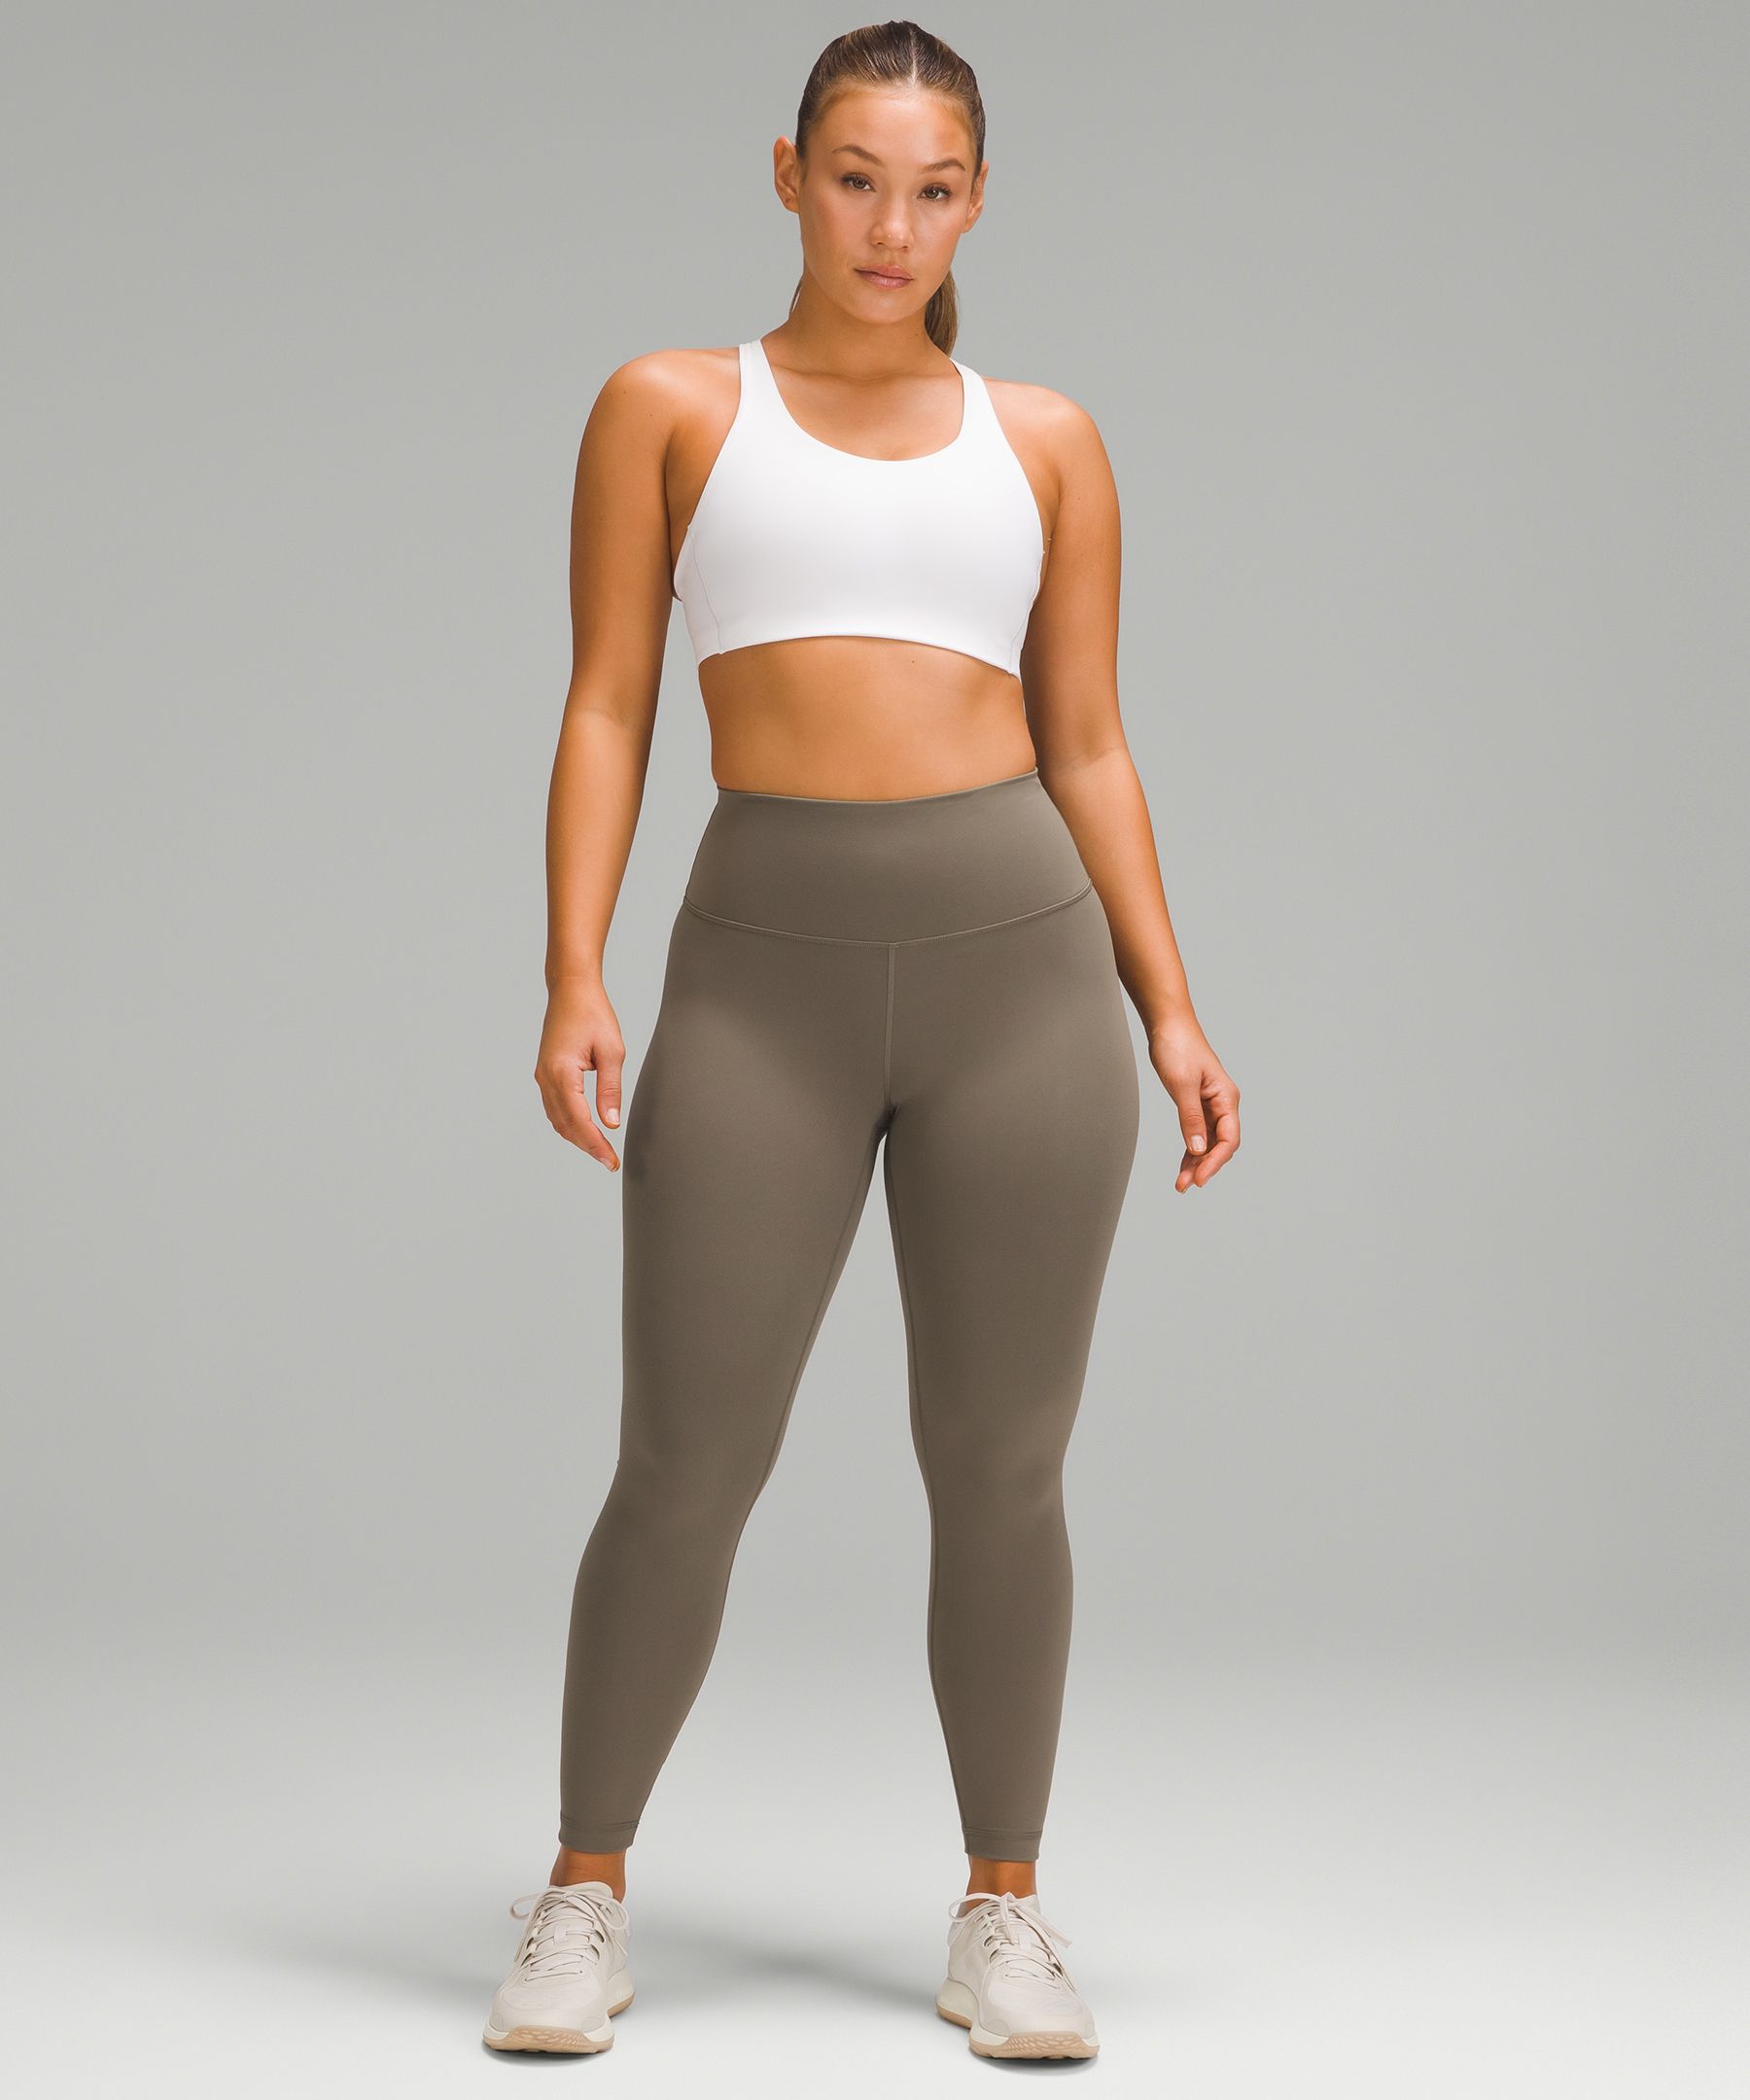 Matching Leggings: Lululemon Wunder Train High-Rise Tight, Lululemon's  Already Ready For 2022 With These 12 Cute New Workout Clothes